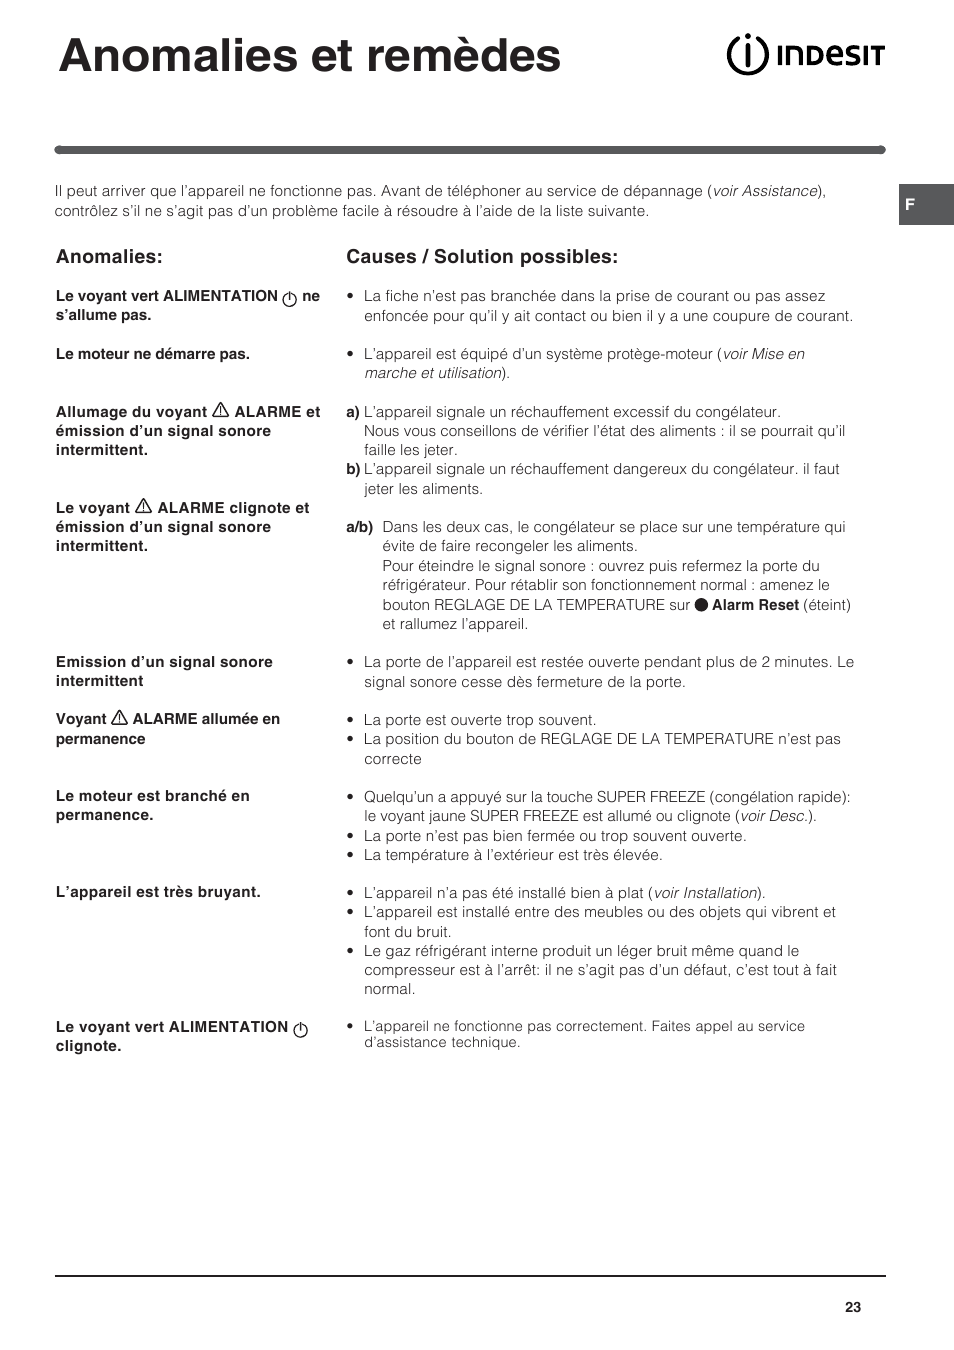 Anomalies et remèdes | Indesit UFAAN 400 NF User Manual | Page 23 / 56